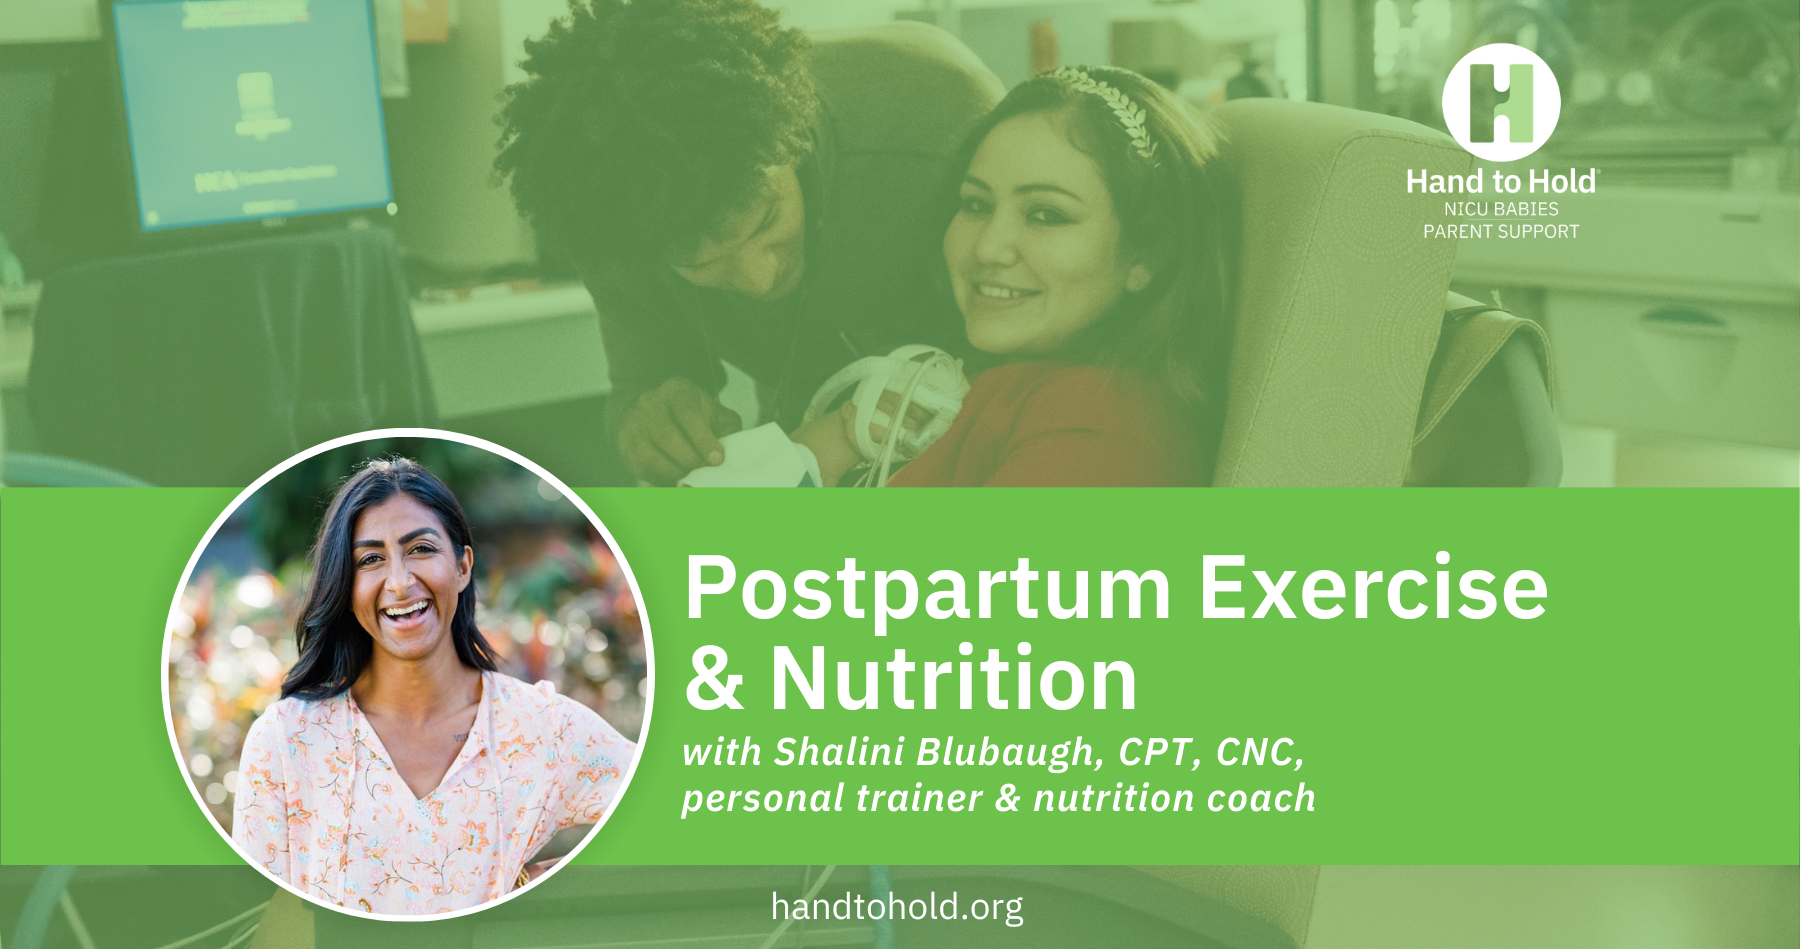 Shalini Blubaugh, CPT, CNC, nutrition and exercise, hand to hold nicu babies parent support podcast